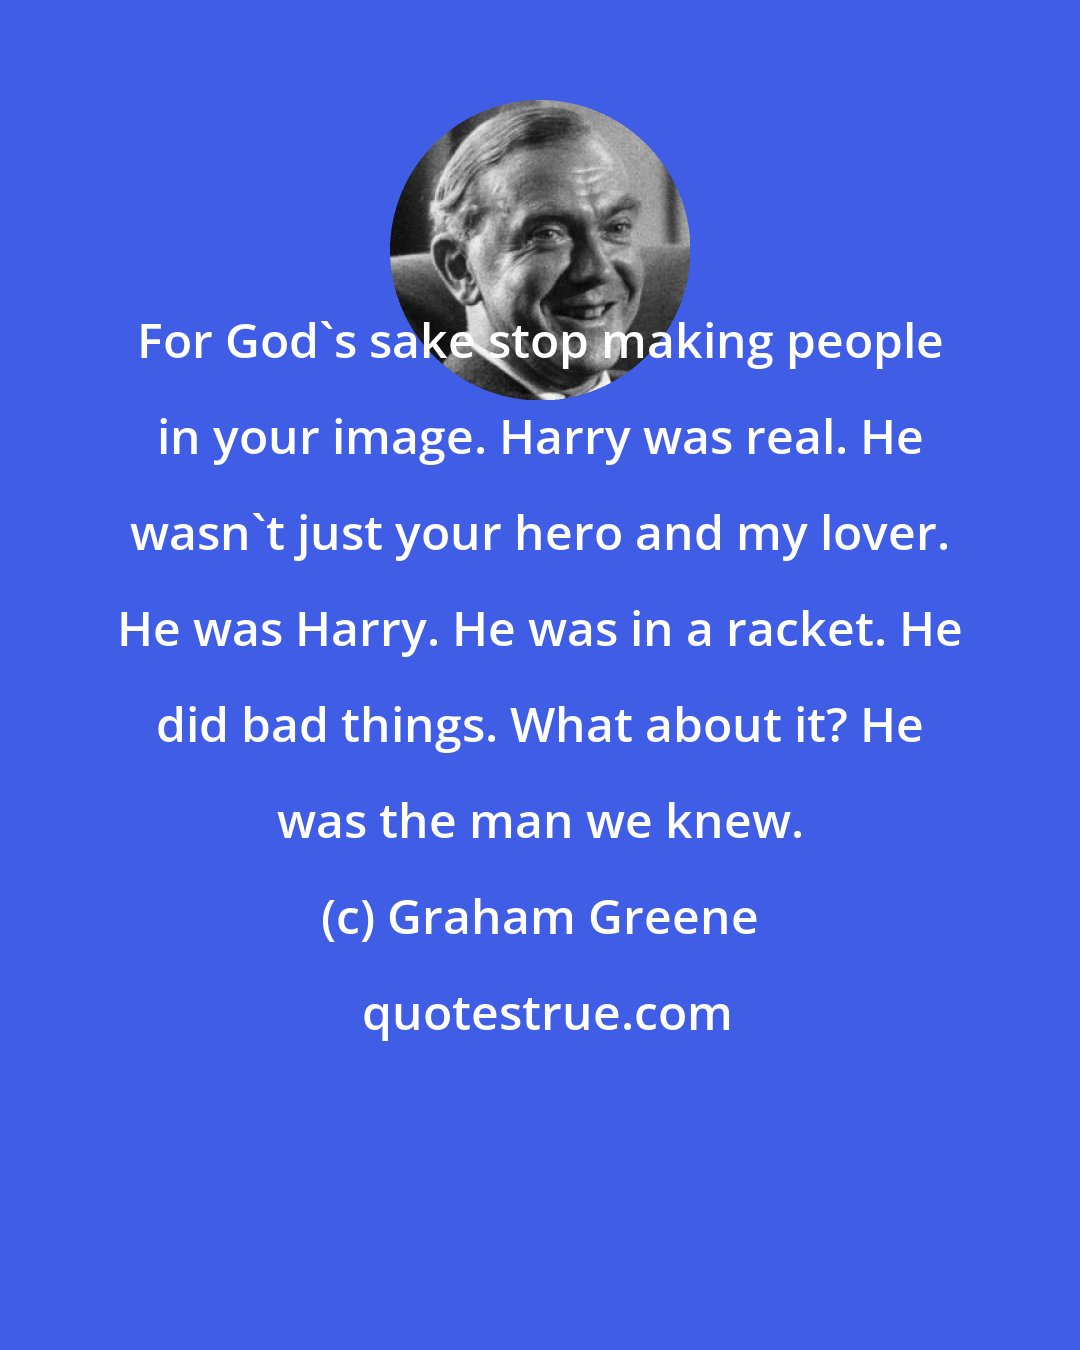 Graham Greene: For God's sake stop making people in your image. Harry was real. He wasn't just your hero and my lover. He was Harry. He was in a racket. He did bad things. What about it? He was the man we knew.